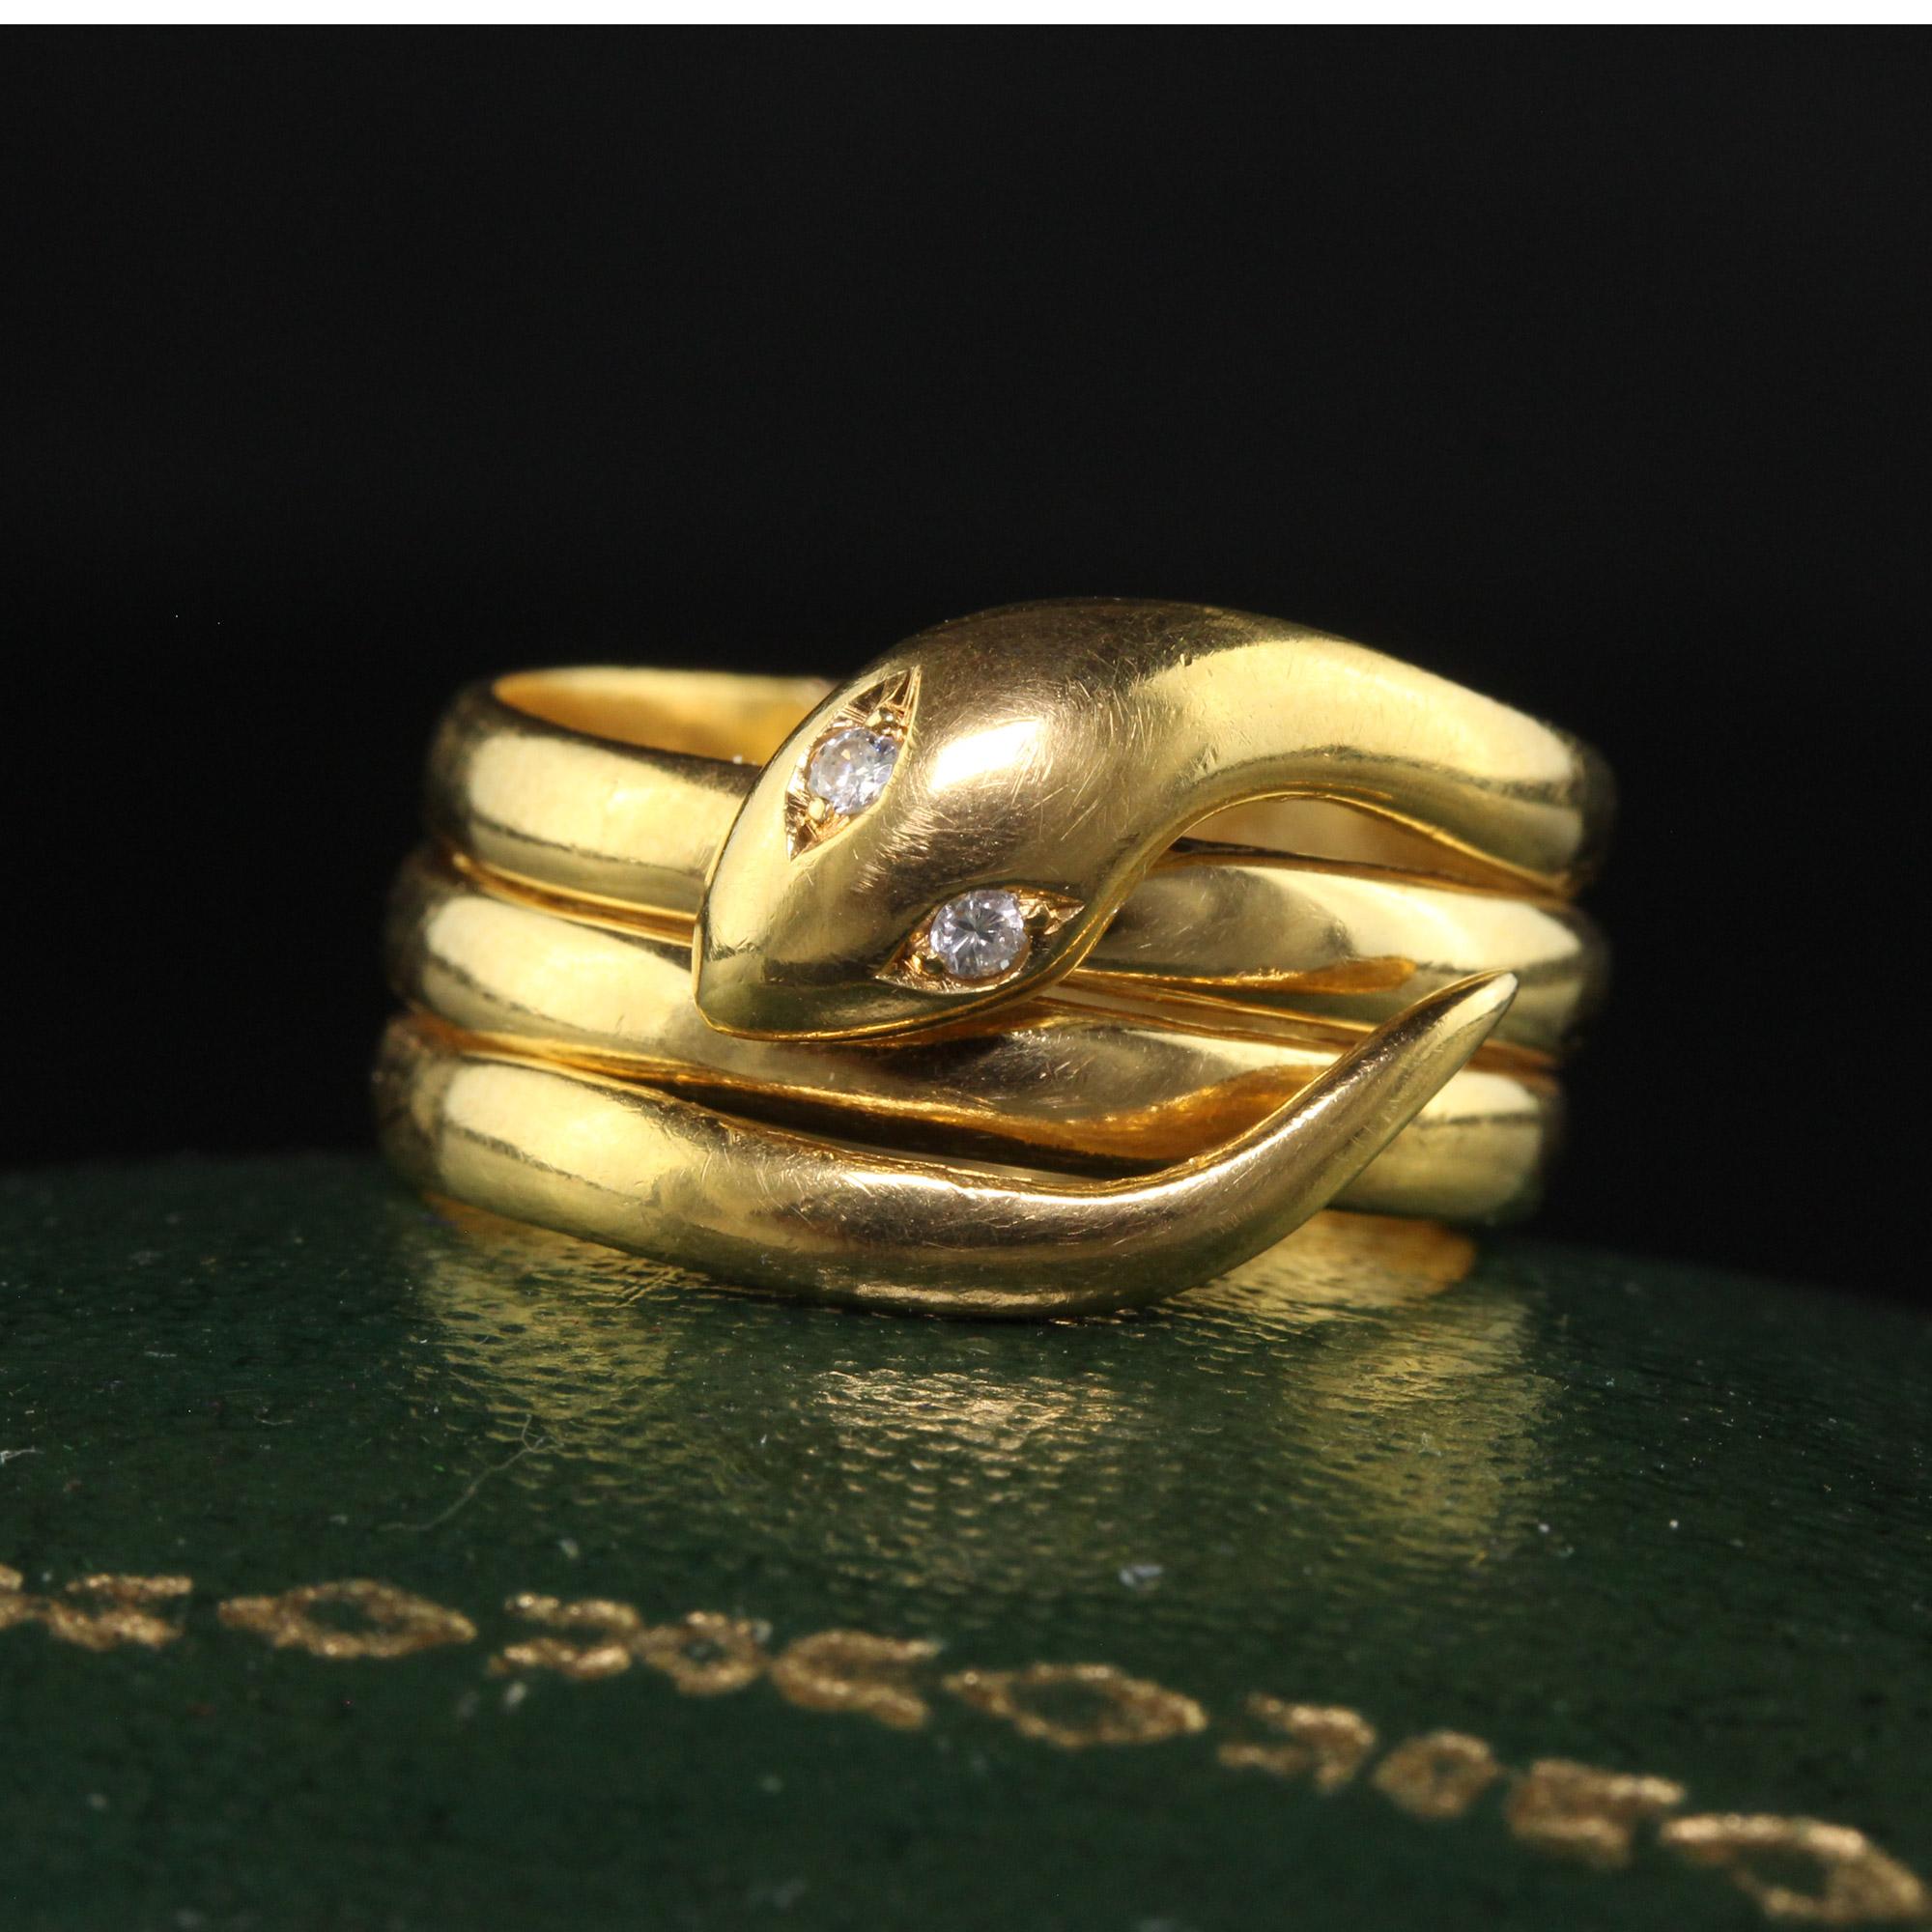 Beautiful Antique Victorian 18K Yellow Gold Diamond Coiled Snaked Ring. This gorgeous Victorian snake ring is crafted in 18k yellow gold. The eyes of the snake are diamonds and the ring is in good condition. The ring sits low on the finger and is